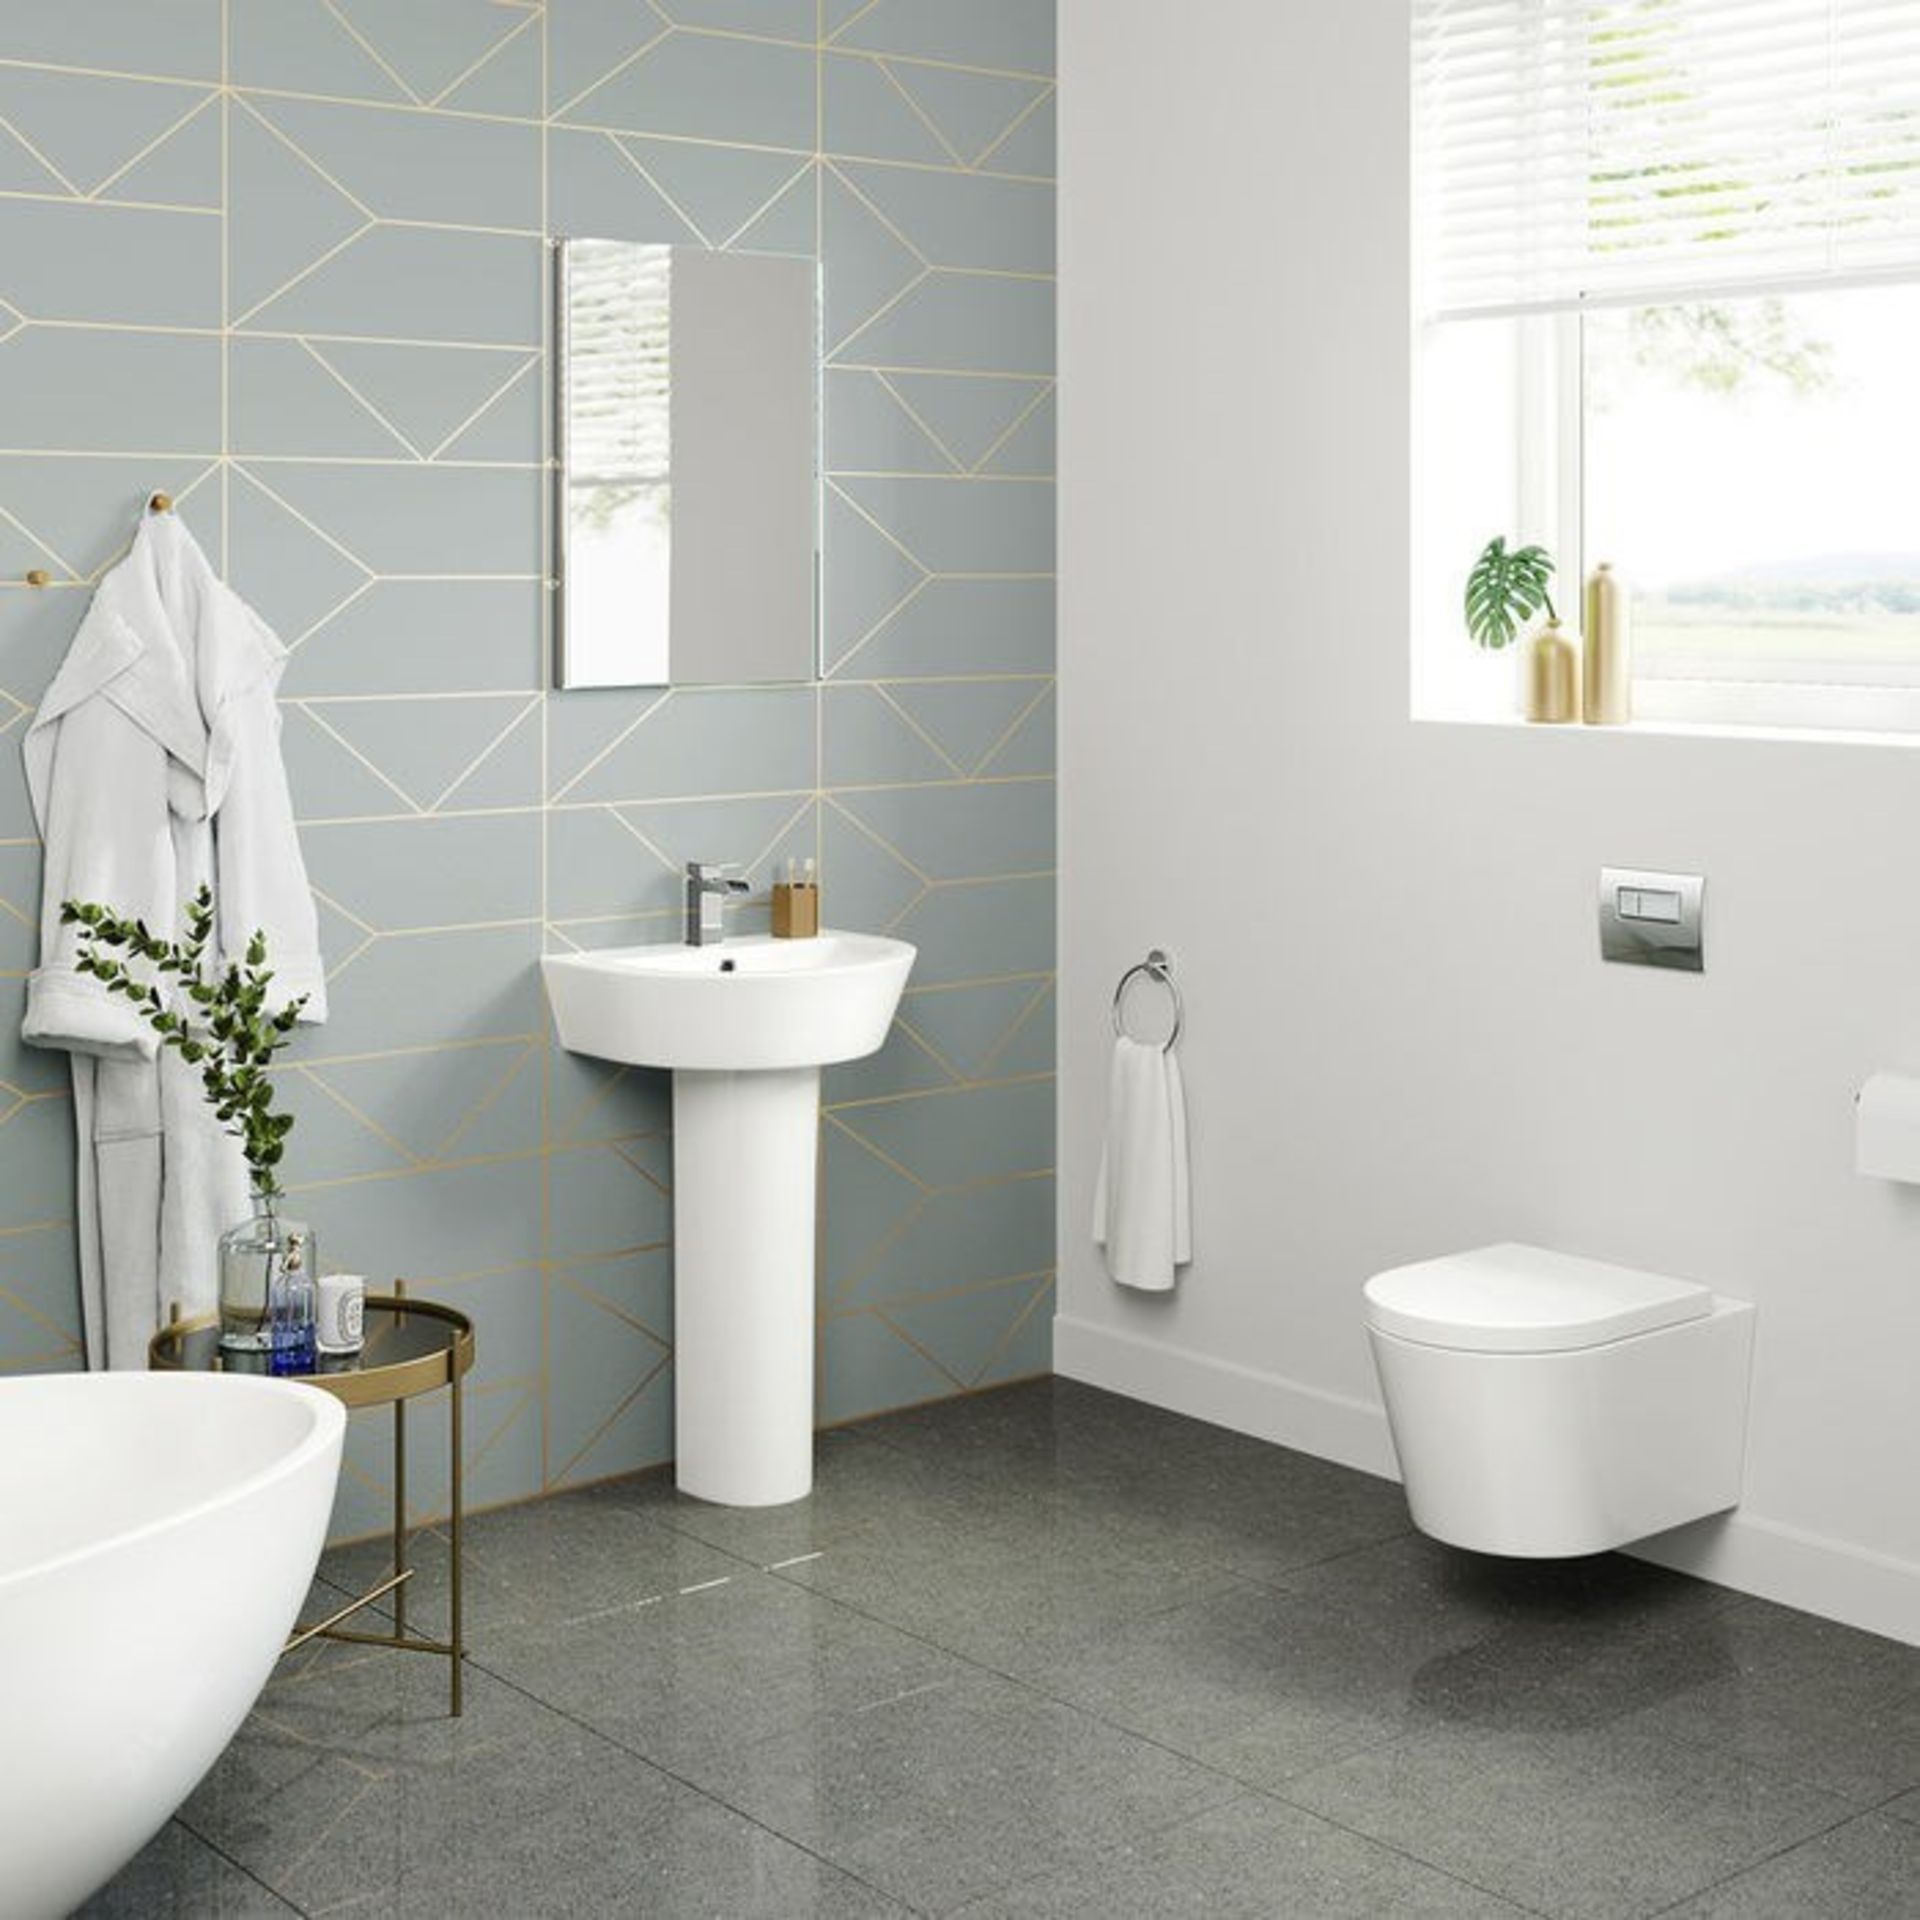 NEW & BOXED Lyon II Wall Hung Toilet inc Luxury Soft Close Seat. RRP £349.99 each.We lov... - Image 2 of 2